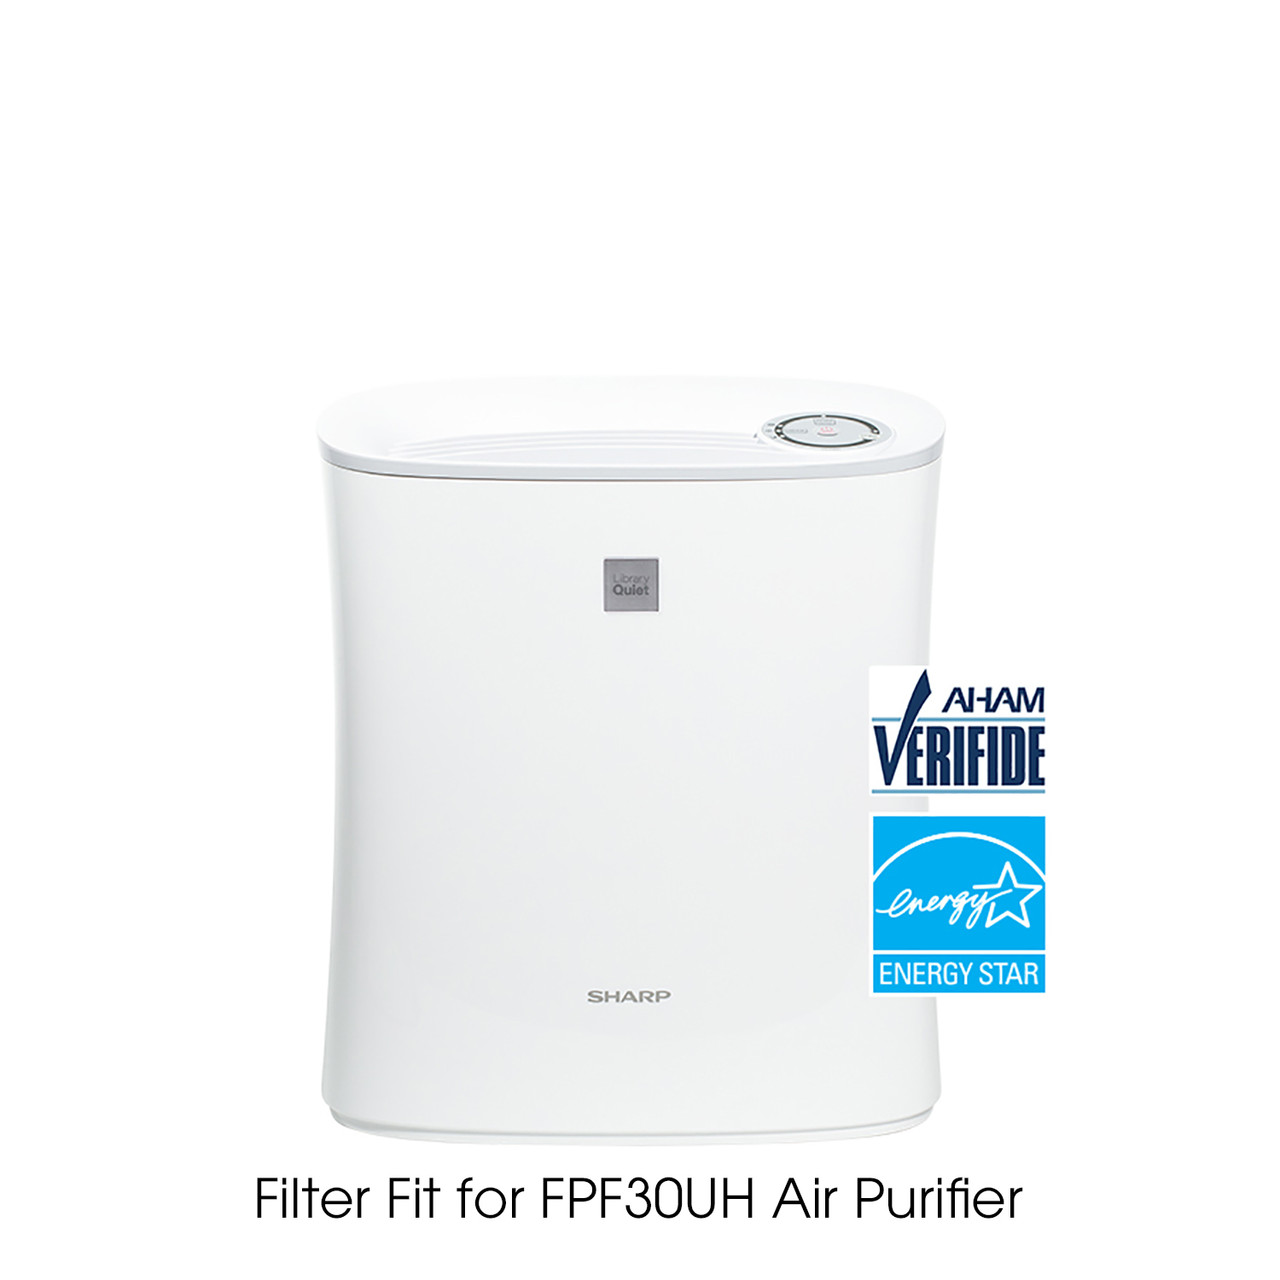 Sharp FPF30UH Air Purifier front view